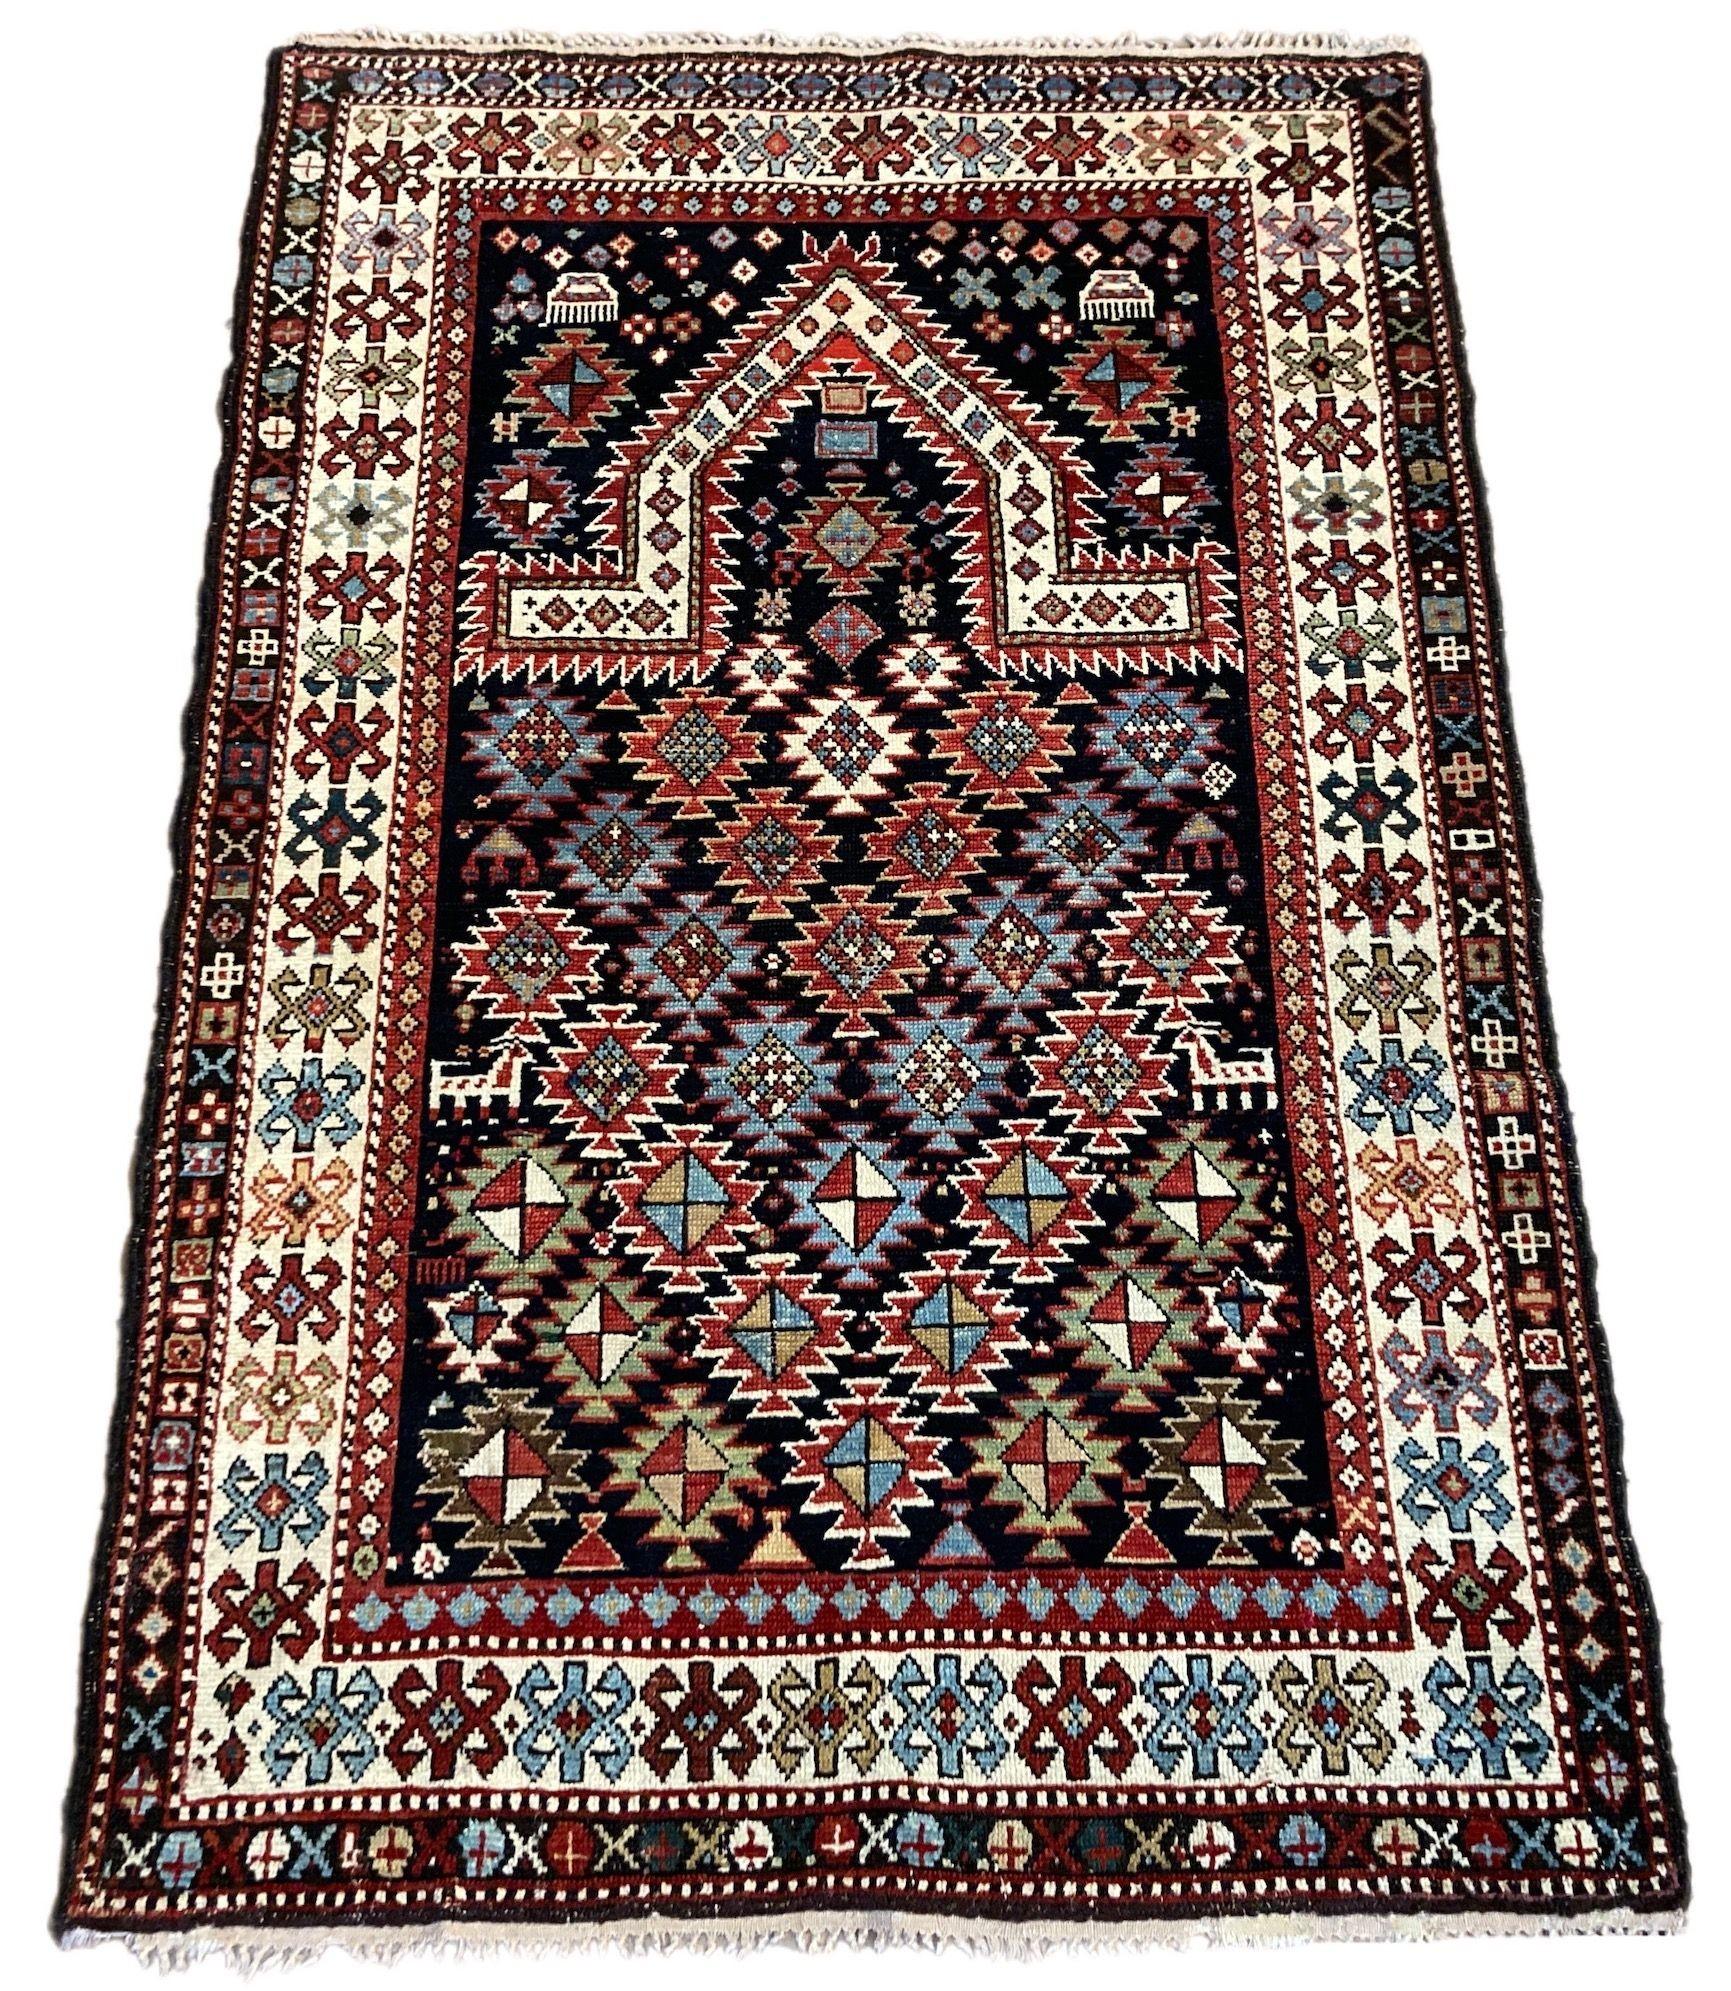 A beautiful little antique pryer rug, handwoven in The Caucasus mountains, possibly in Dagestan, circa 1900. It features a traditional Mihrab design on a deep indigo lozenge field with an ivory border. Note the small animal figures in the field.